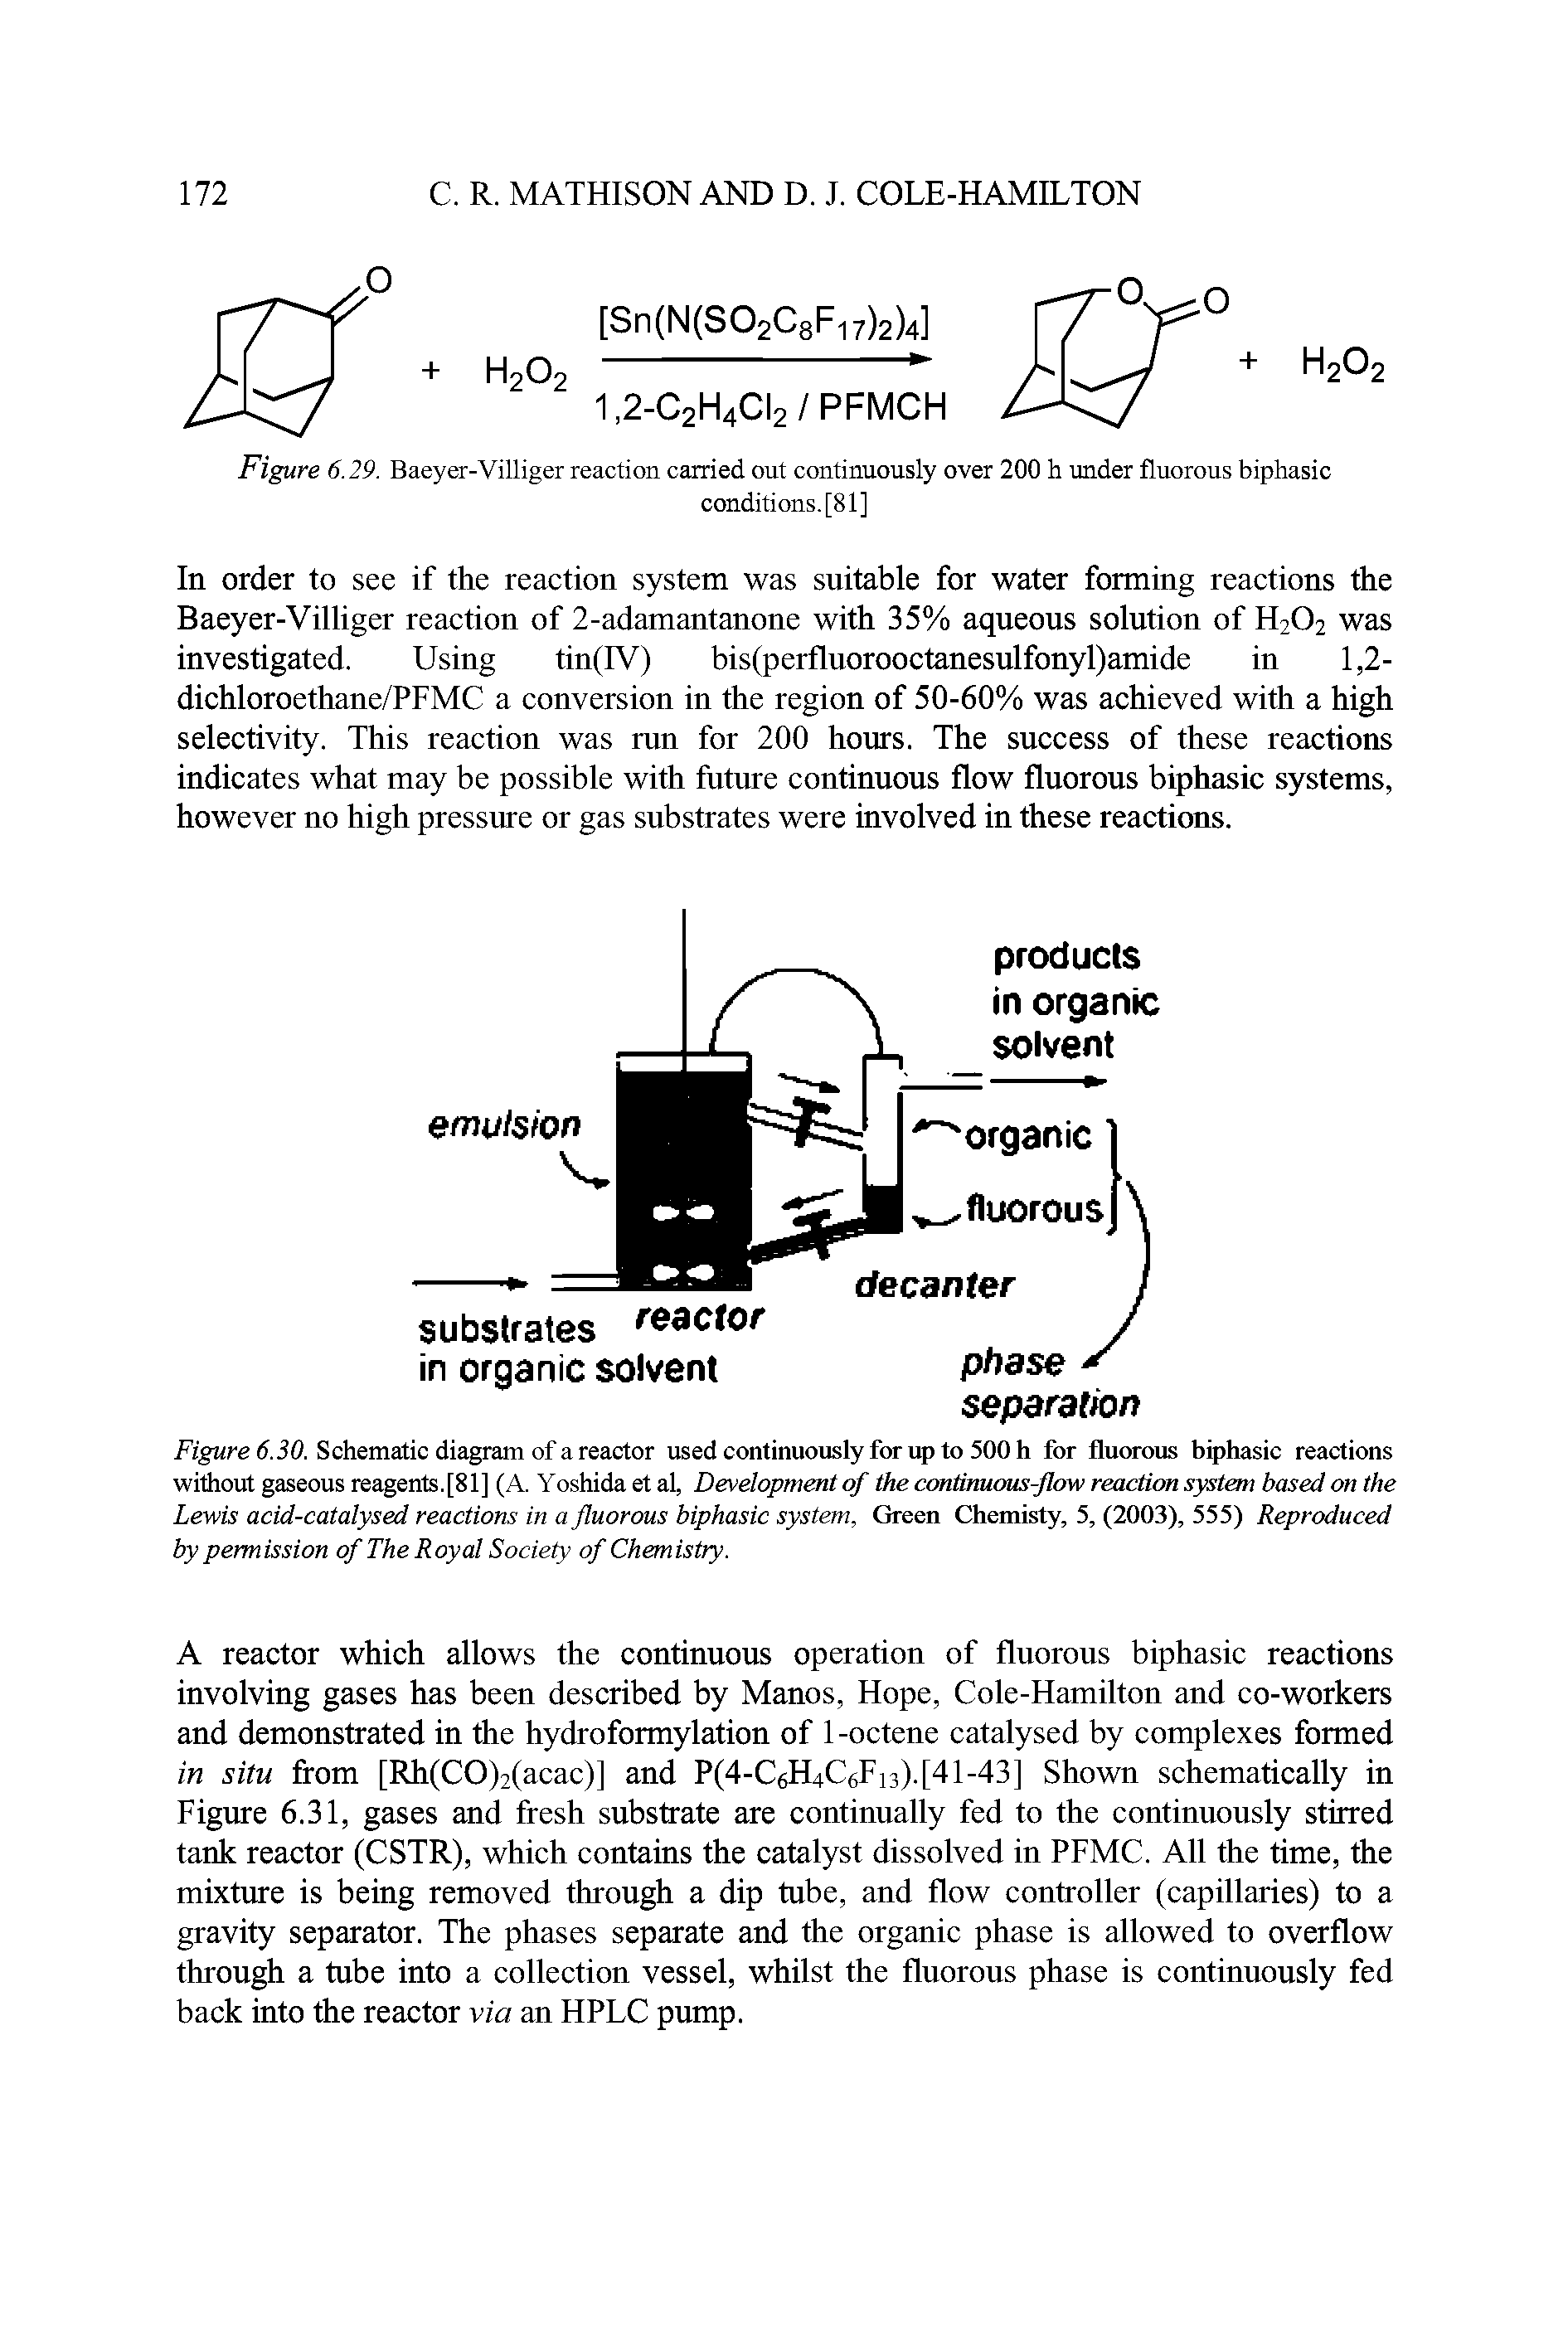 Figure 6.30. Schematic diagram of a reactor used continuously for up to 500 h for fluorous biphasic reactions without gaseous reagents. [81] (A. Yoshidaetal, Development of the continuous-flow reaction system based on the Lewis acid-catalysed reactions in a fluorous biphasic system, Green Chemisty, 5, (2003), 555) Reproduced by permission of The Royal Society of Chemistry.